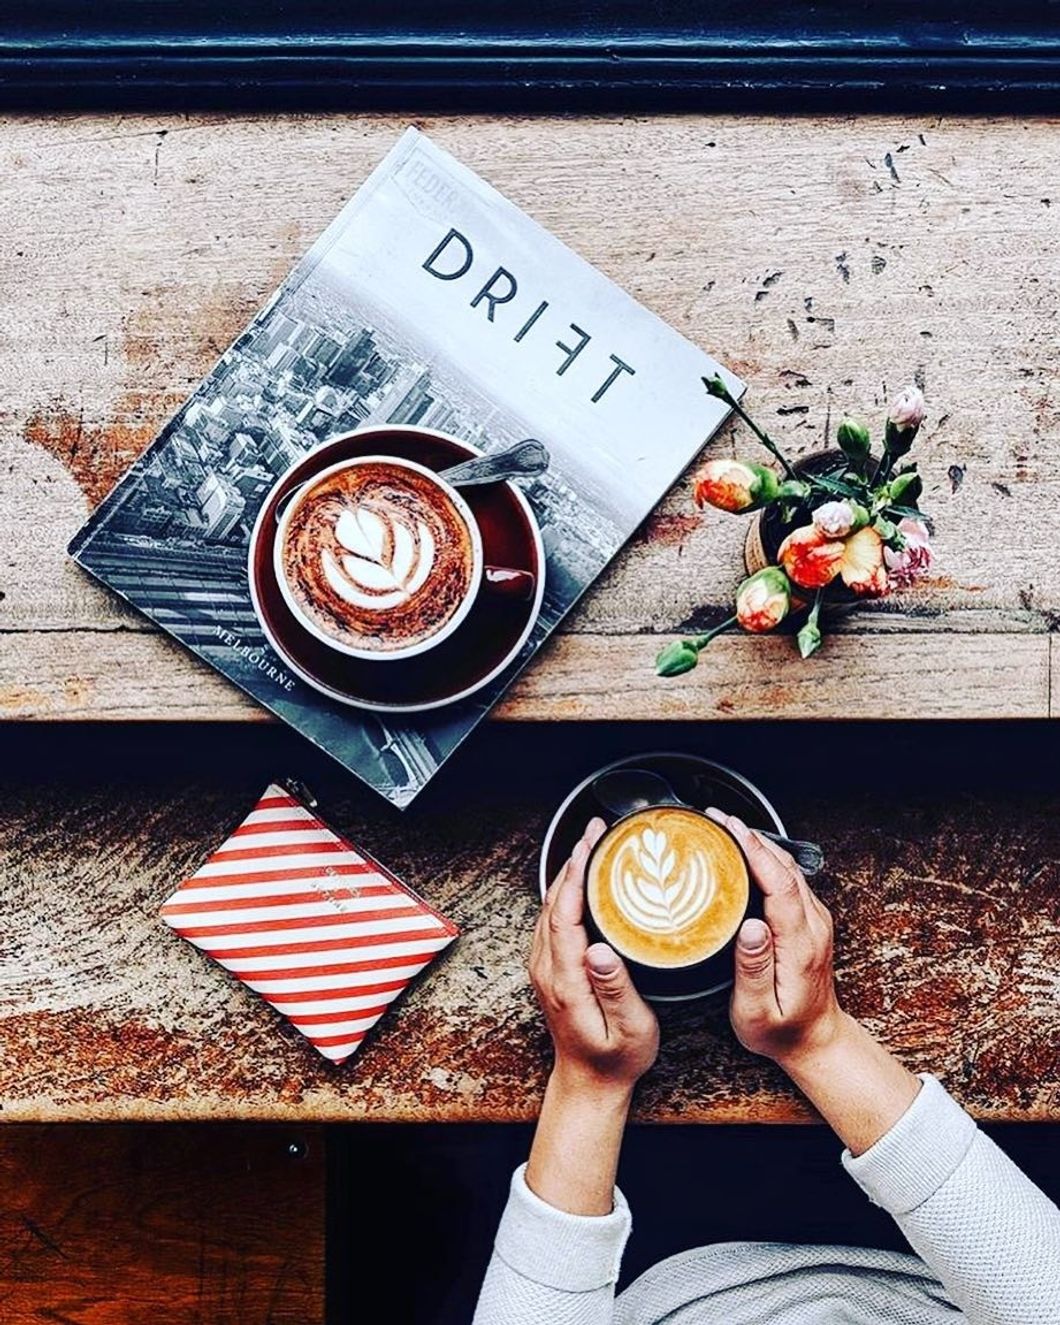 11 Aesthetically-Pleasing Truths That Make Coffee Shops The Best Places On Earth